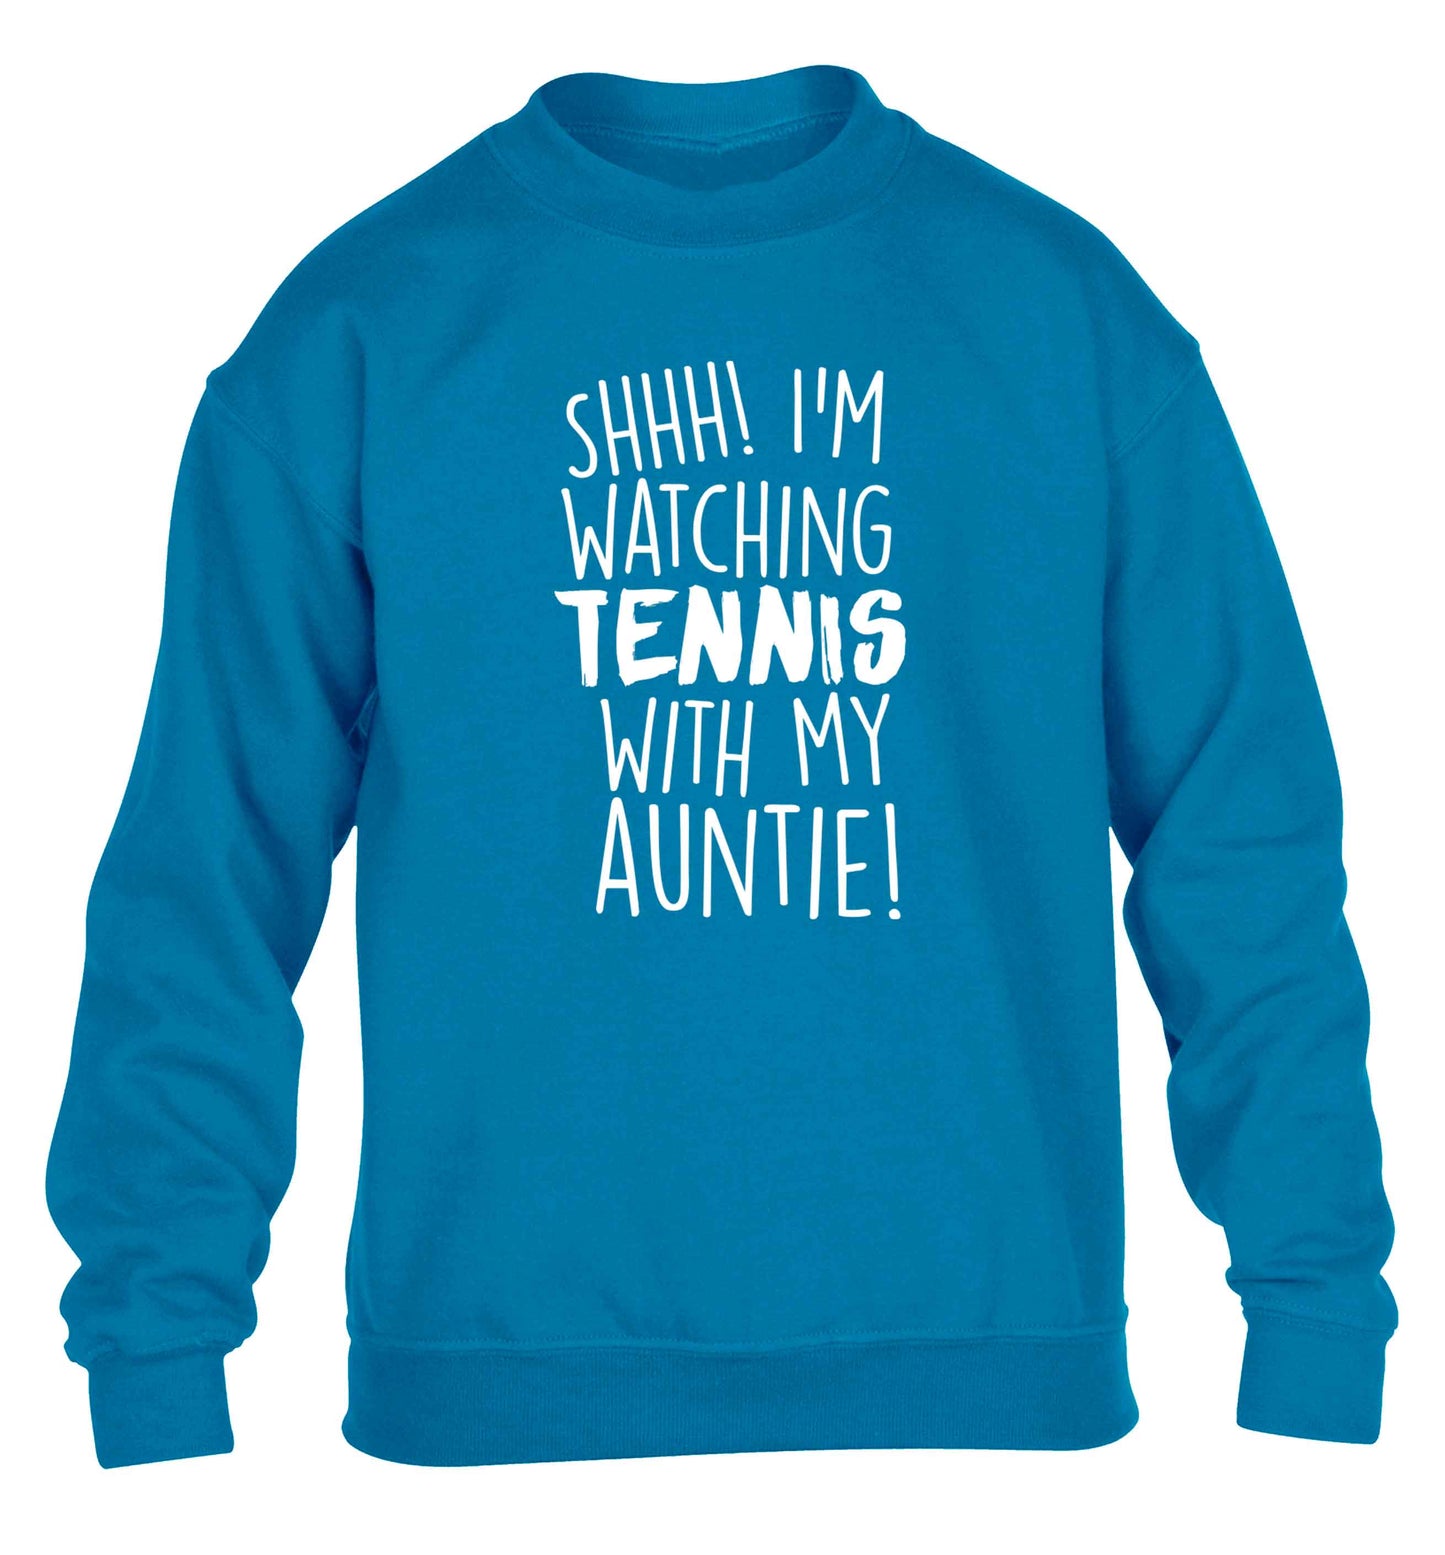 Shh! I'm watching tennis with my auntie! children's blue sweater 12-13 Years